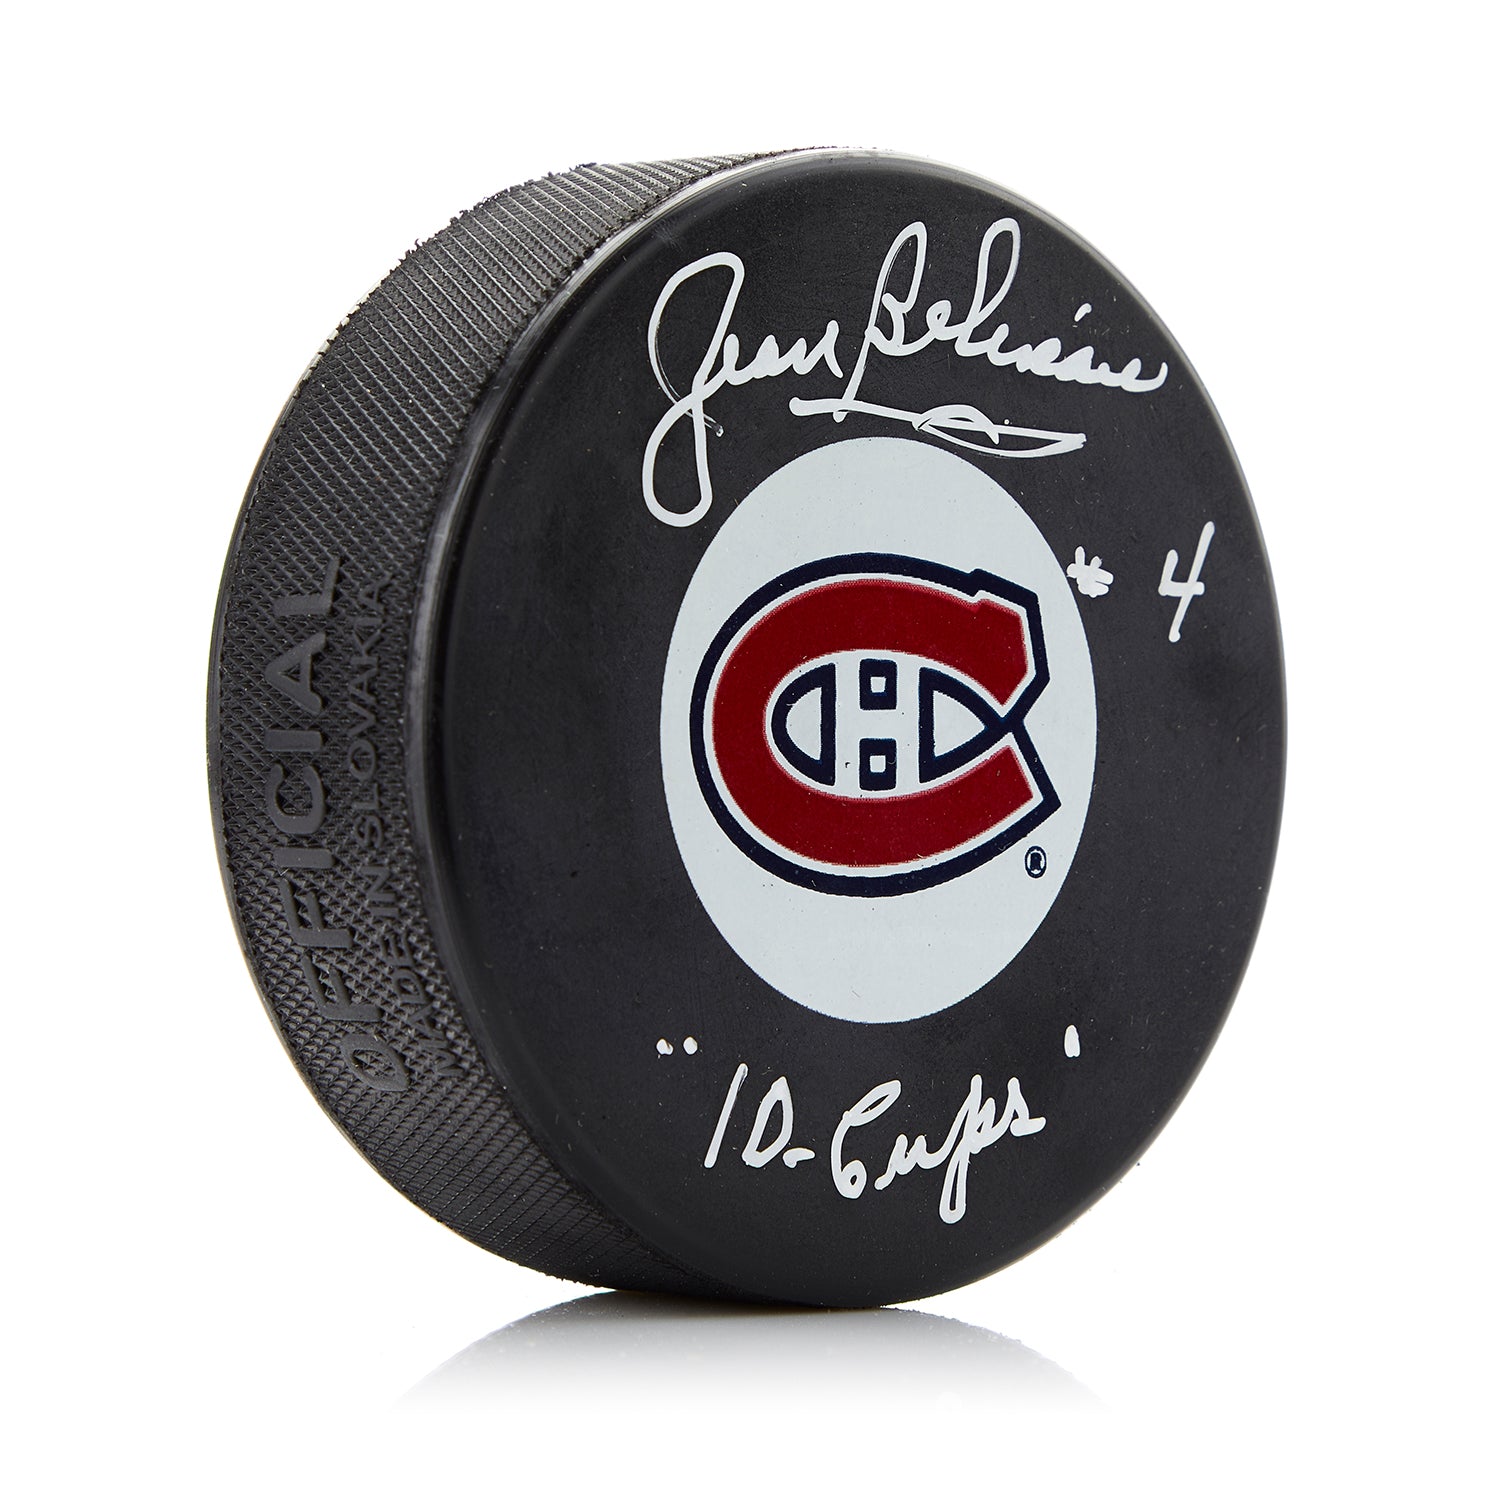 Jean Beliveau Montreal Canadiens Autographed Puck with 10 Cups Note